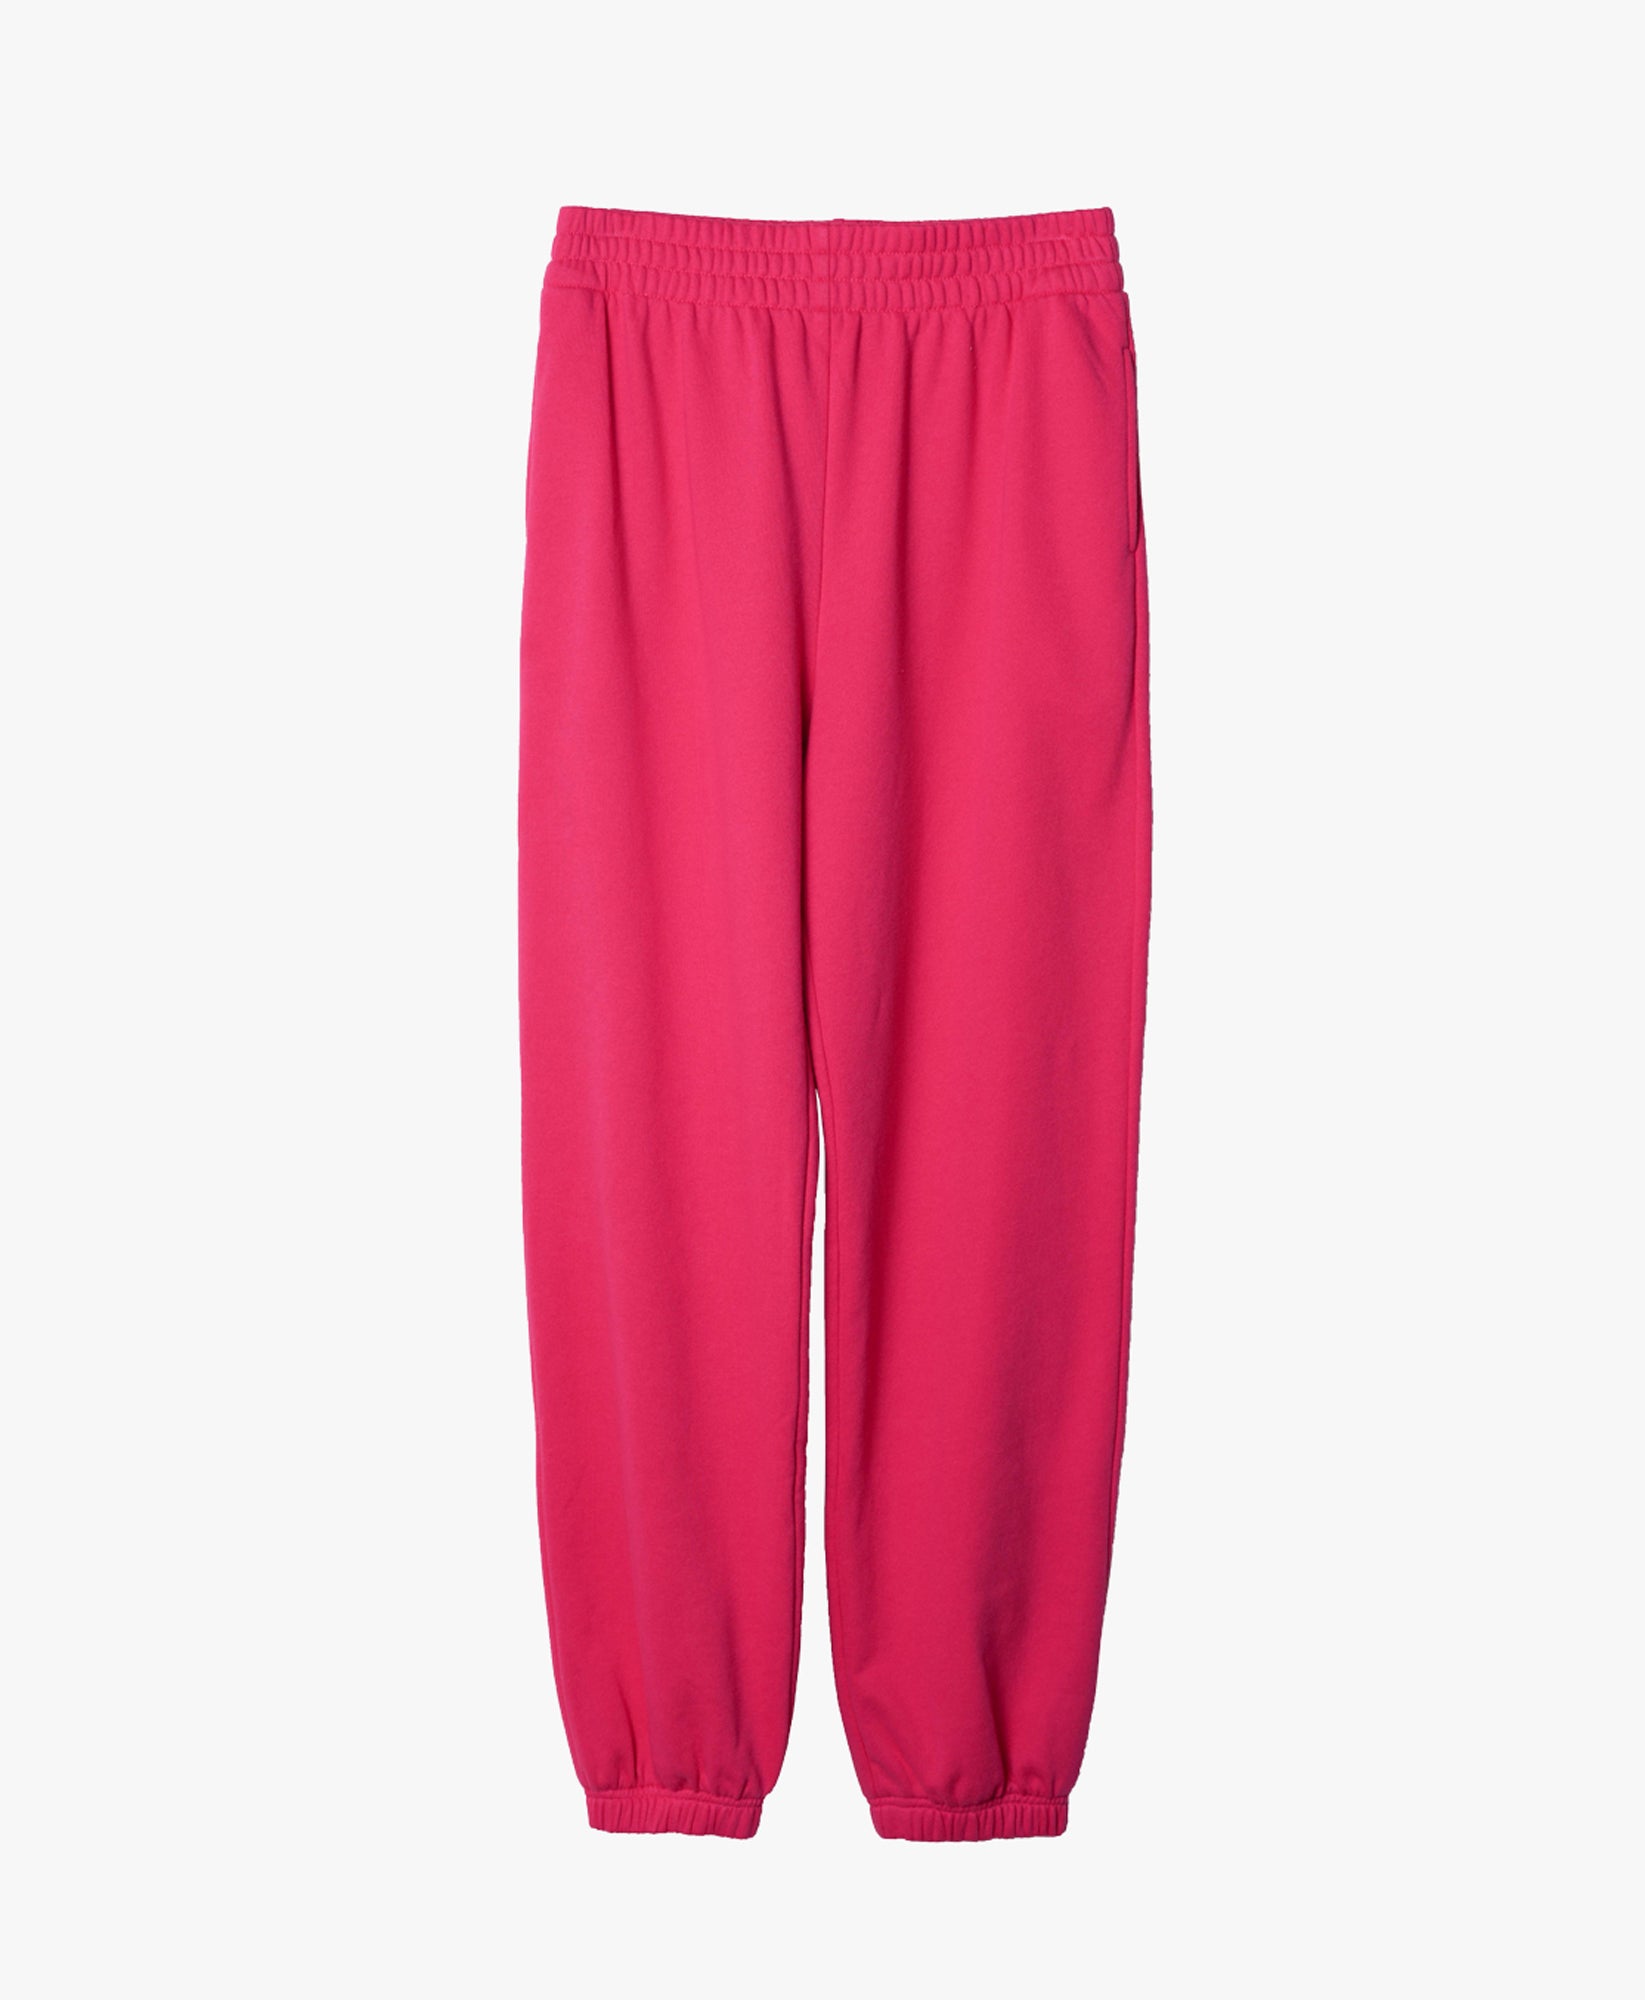 Wear One's At French Terry Sweatpants in Watermelon Pink Flat Front